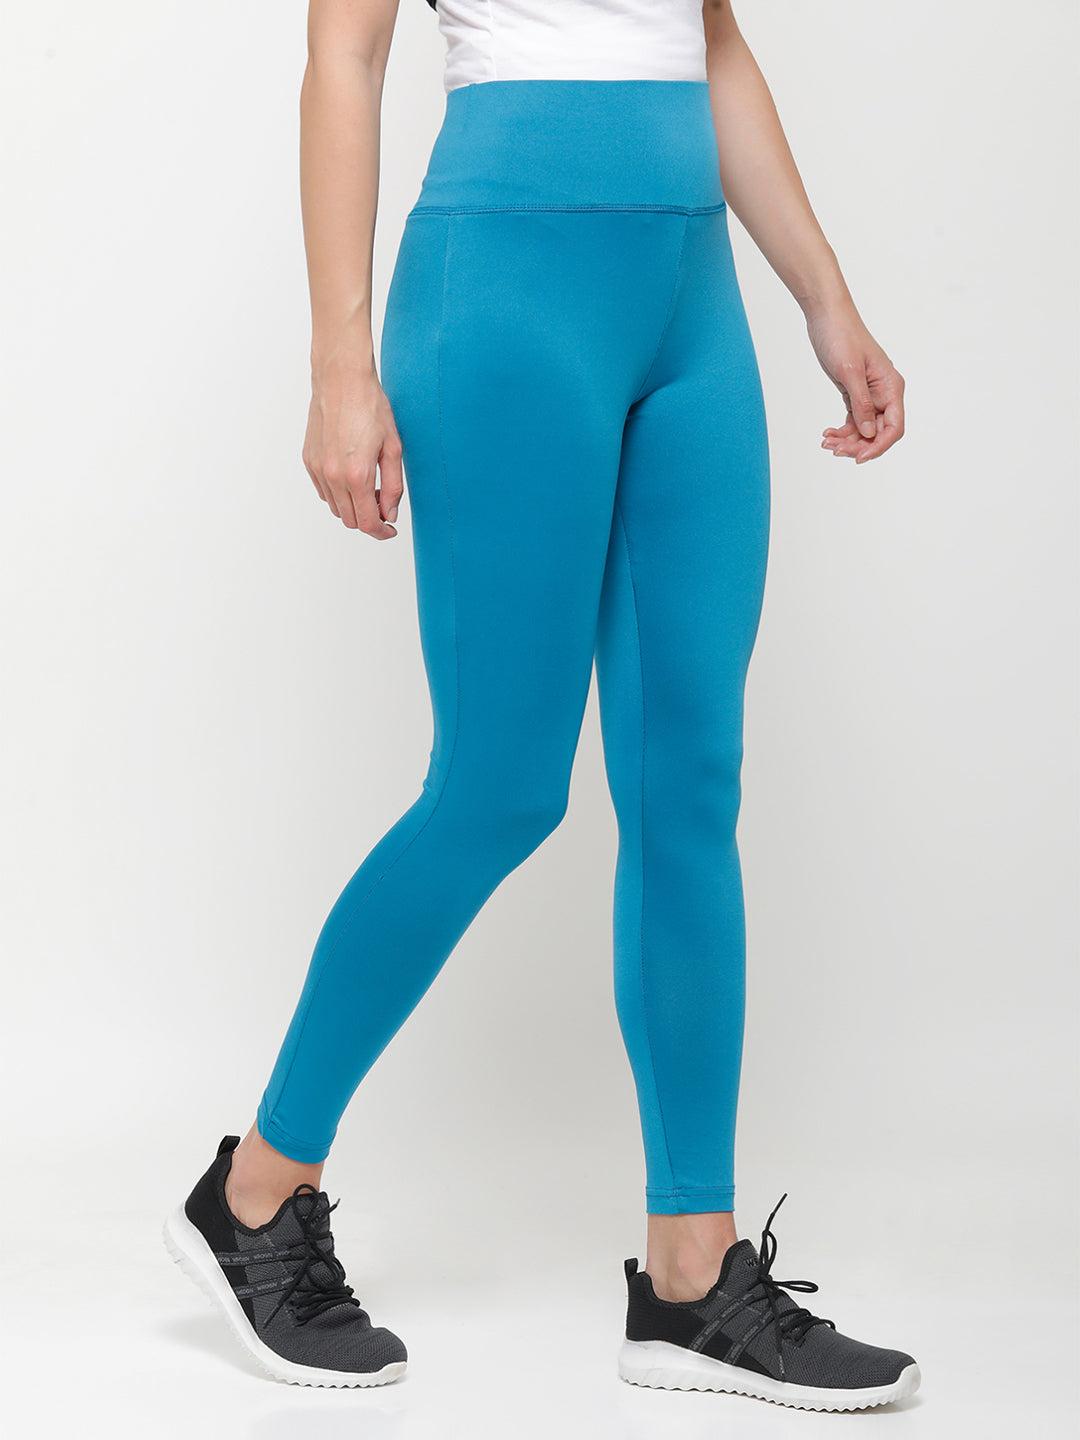 Buy Flex Fit Pocket-Free Gym Leggings for Women The bigbearstore! Turquoise  Blue at Amazon.in